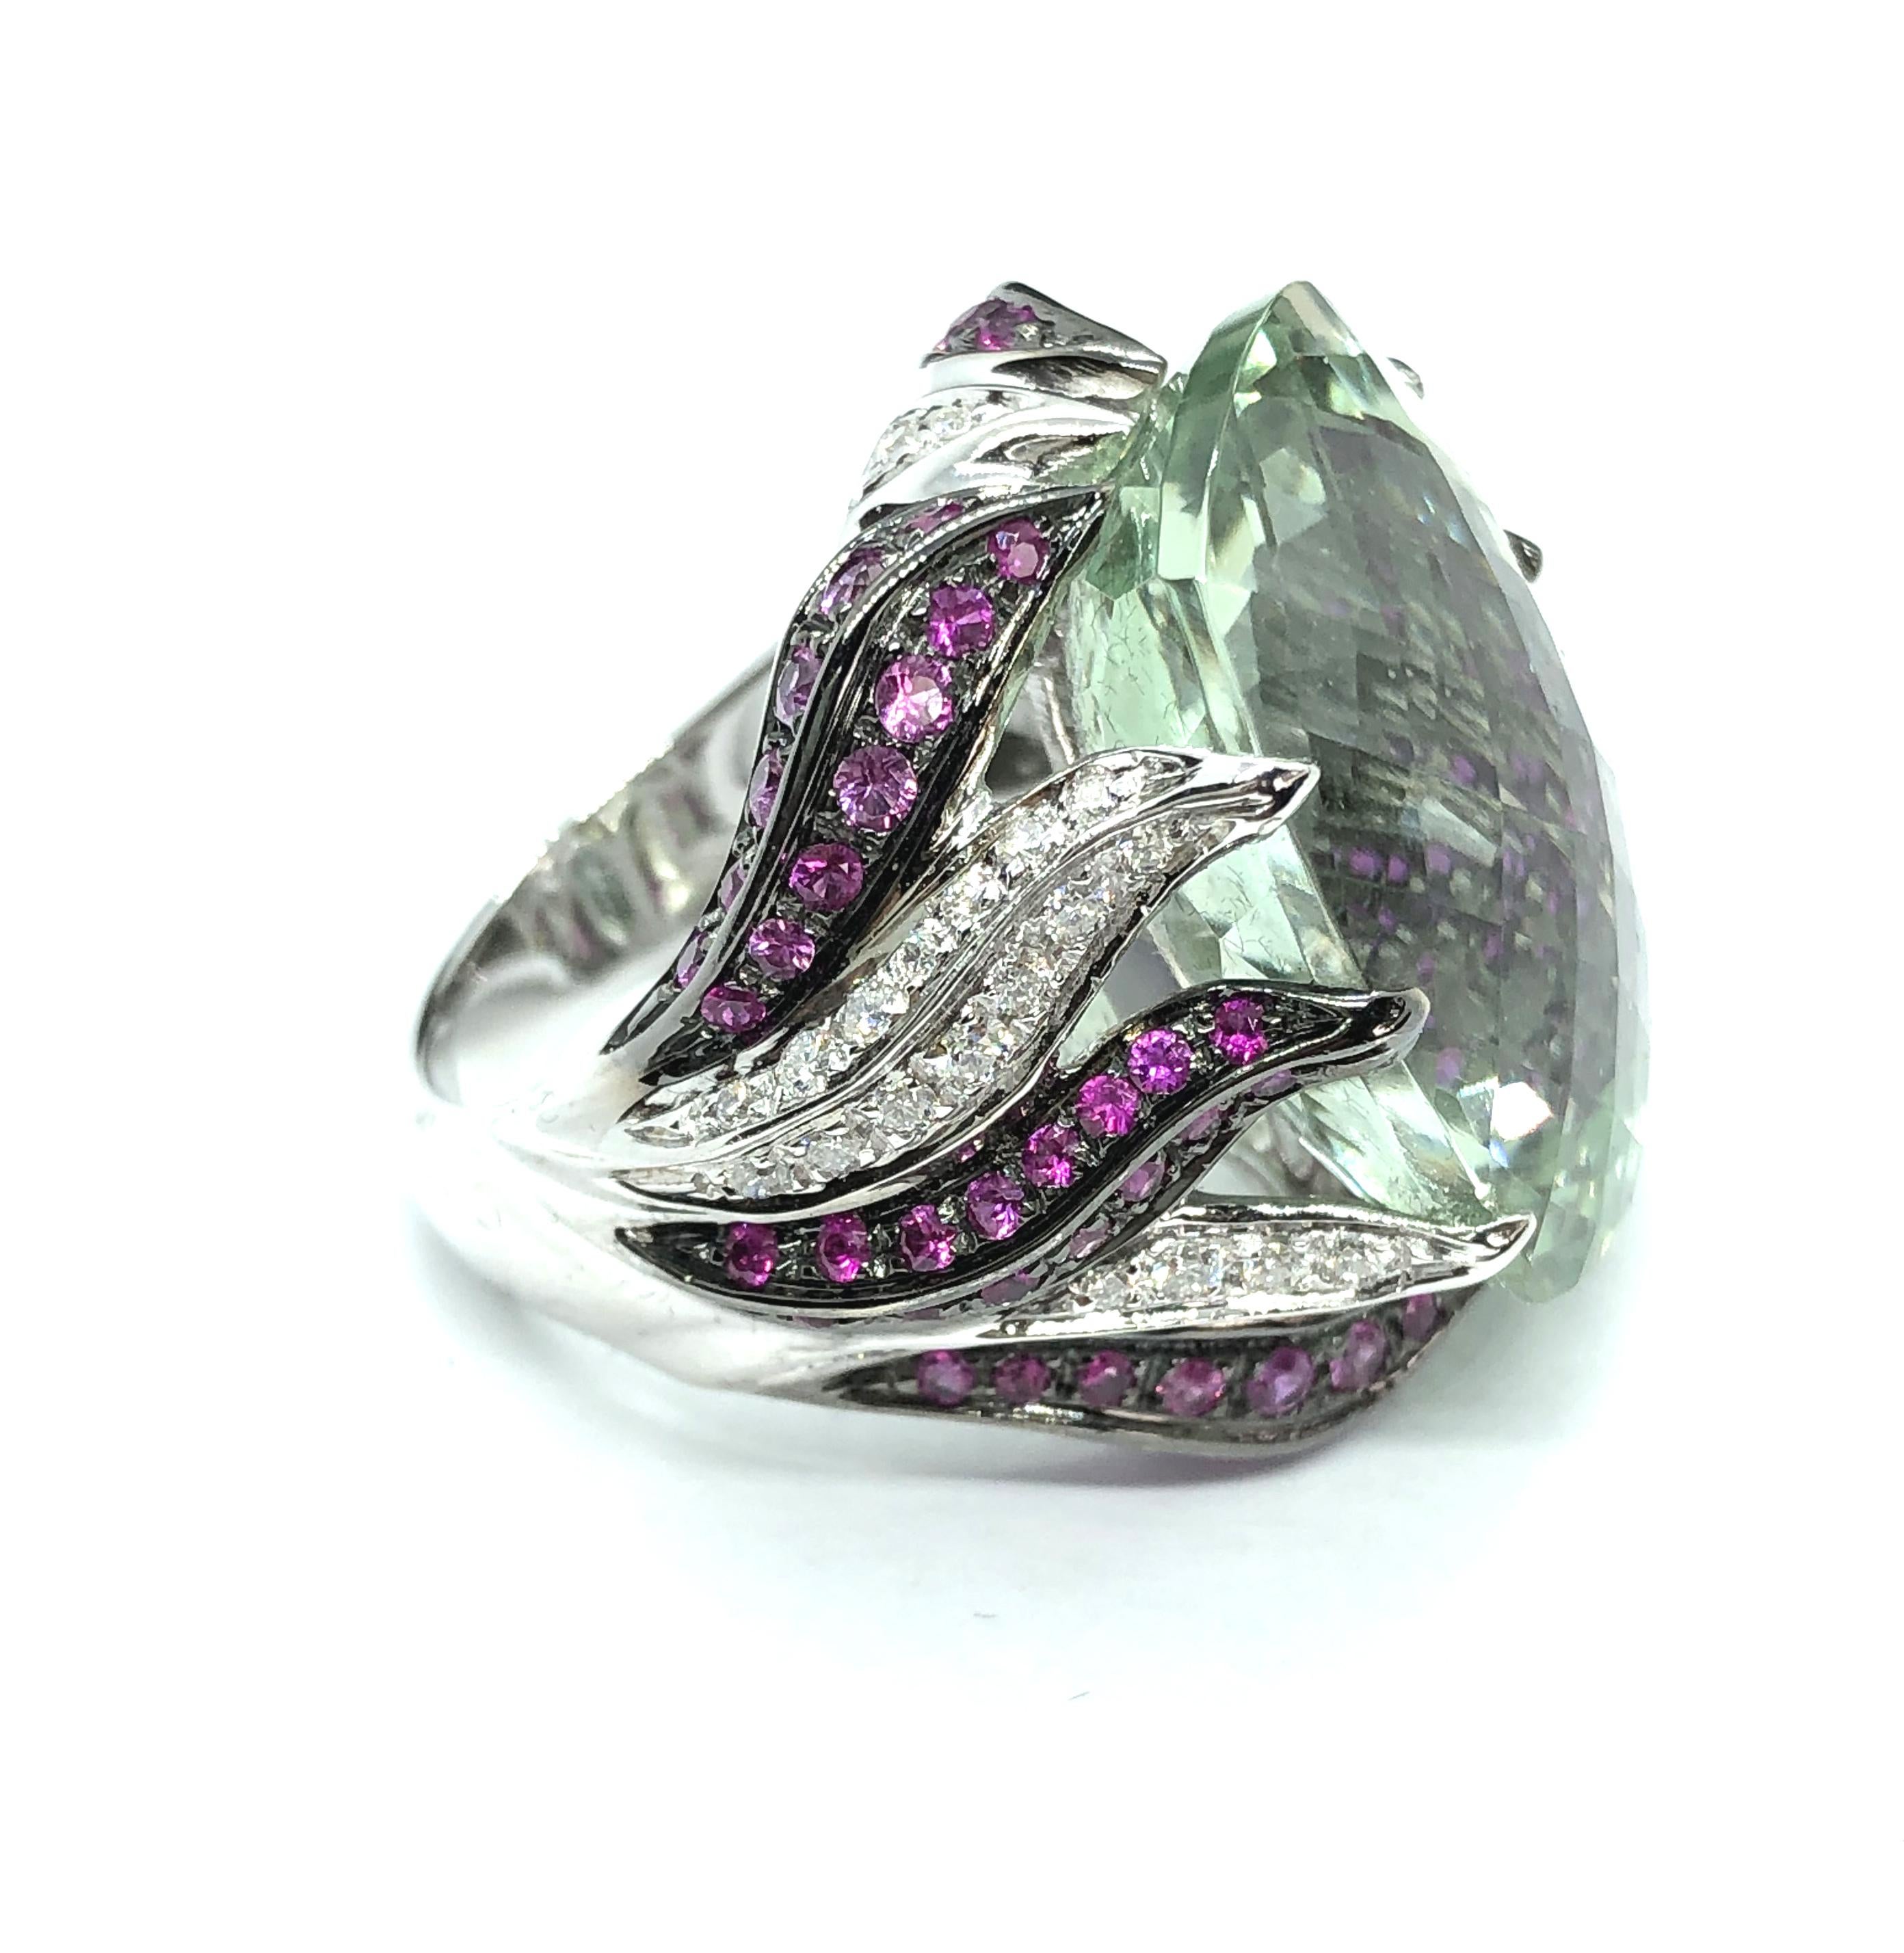 Cushion Cut 23 Ct Green Prasiolite White Gold Cocktail Ring Diamond and Pink Sapphires Flame For Sale